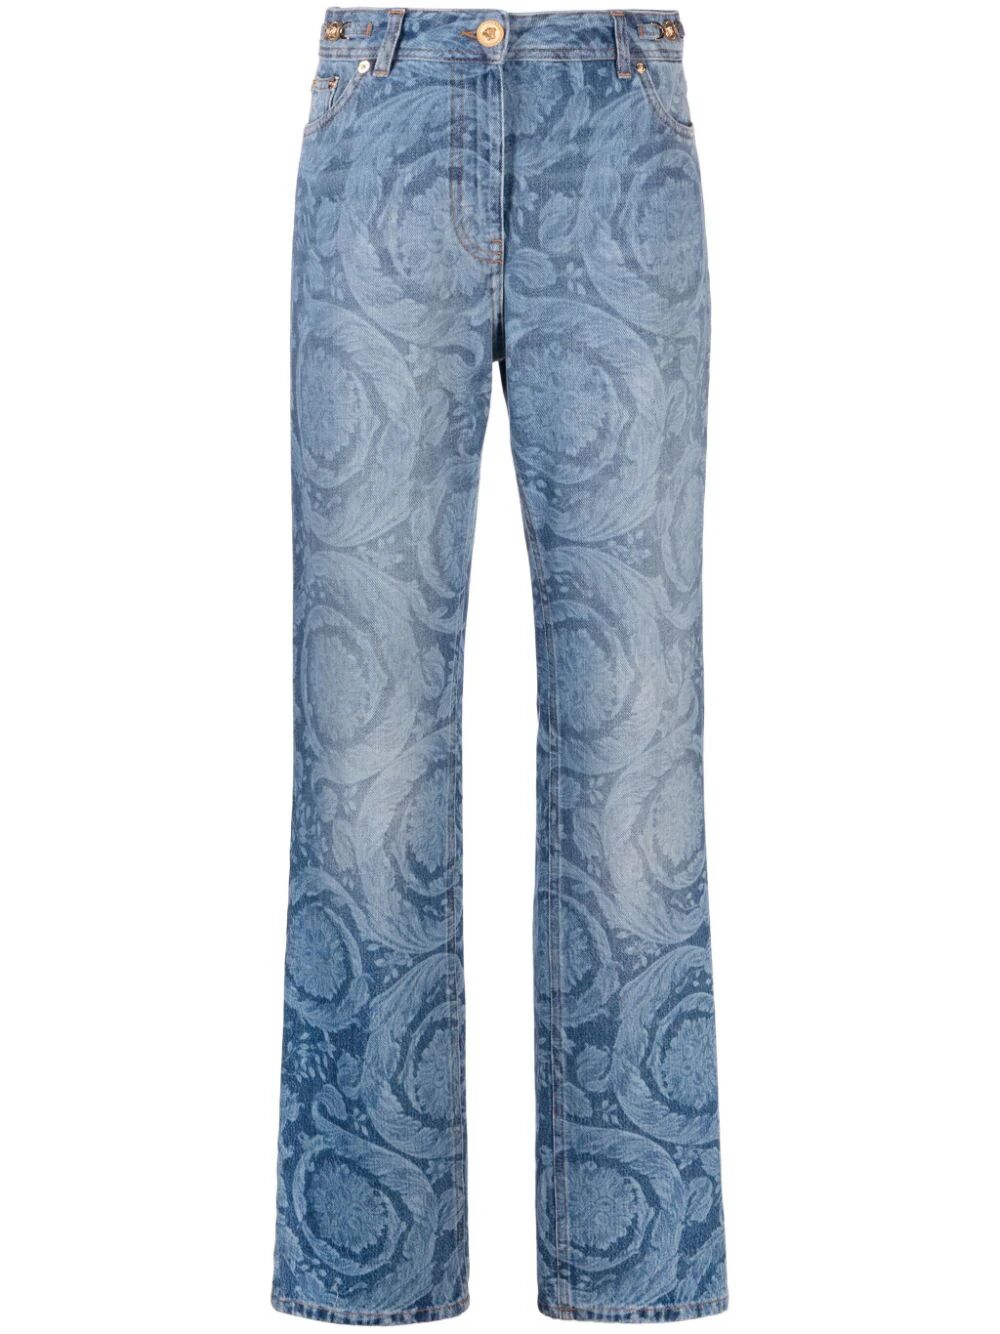 Pant Denim Laser Stone Wash Baroque Series Denim Fabric With Special Treatment